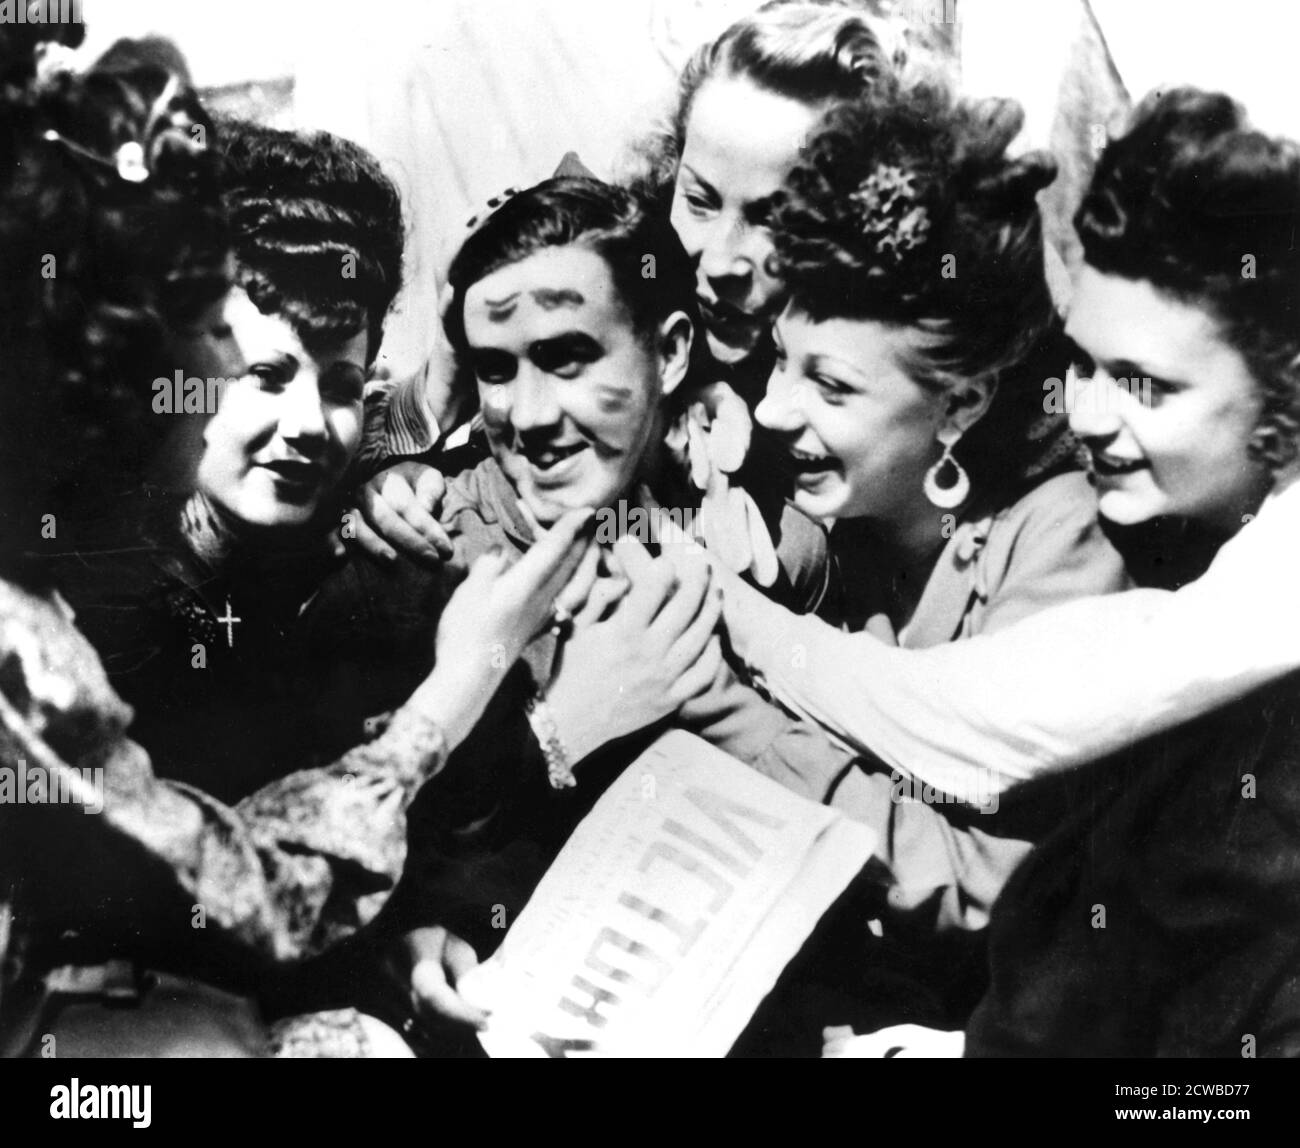 VE Day celebrations, Paris, 8 May 1945. A soldier smothered with kisses by jubilant women. The photographer is unknown. Stock Photo